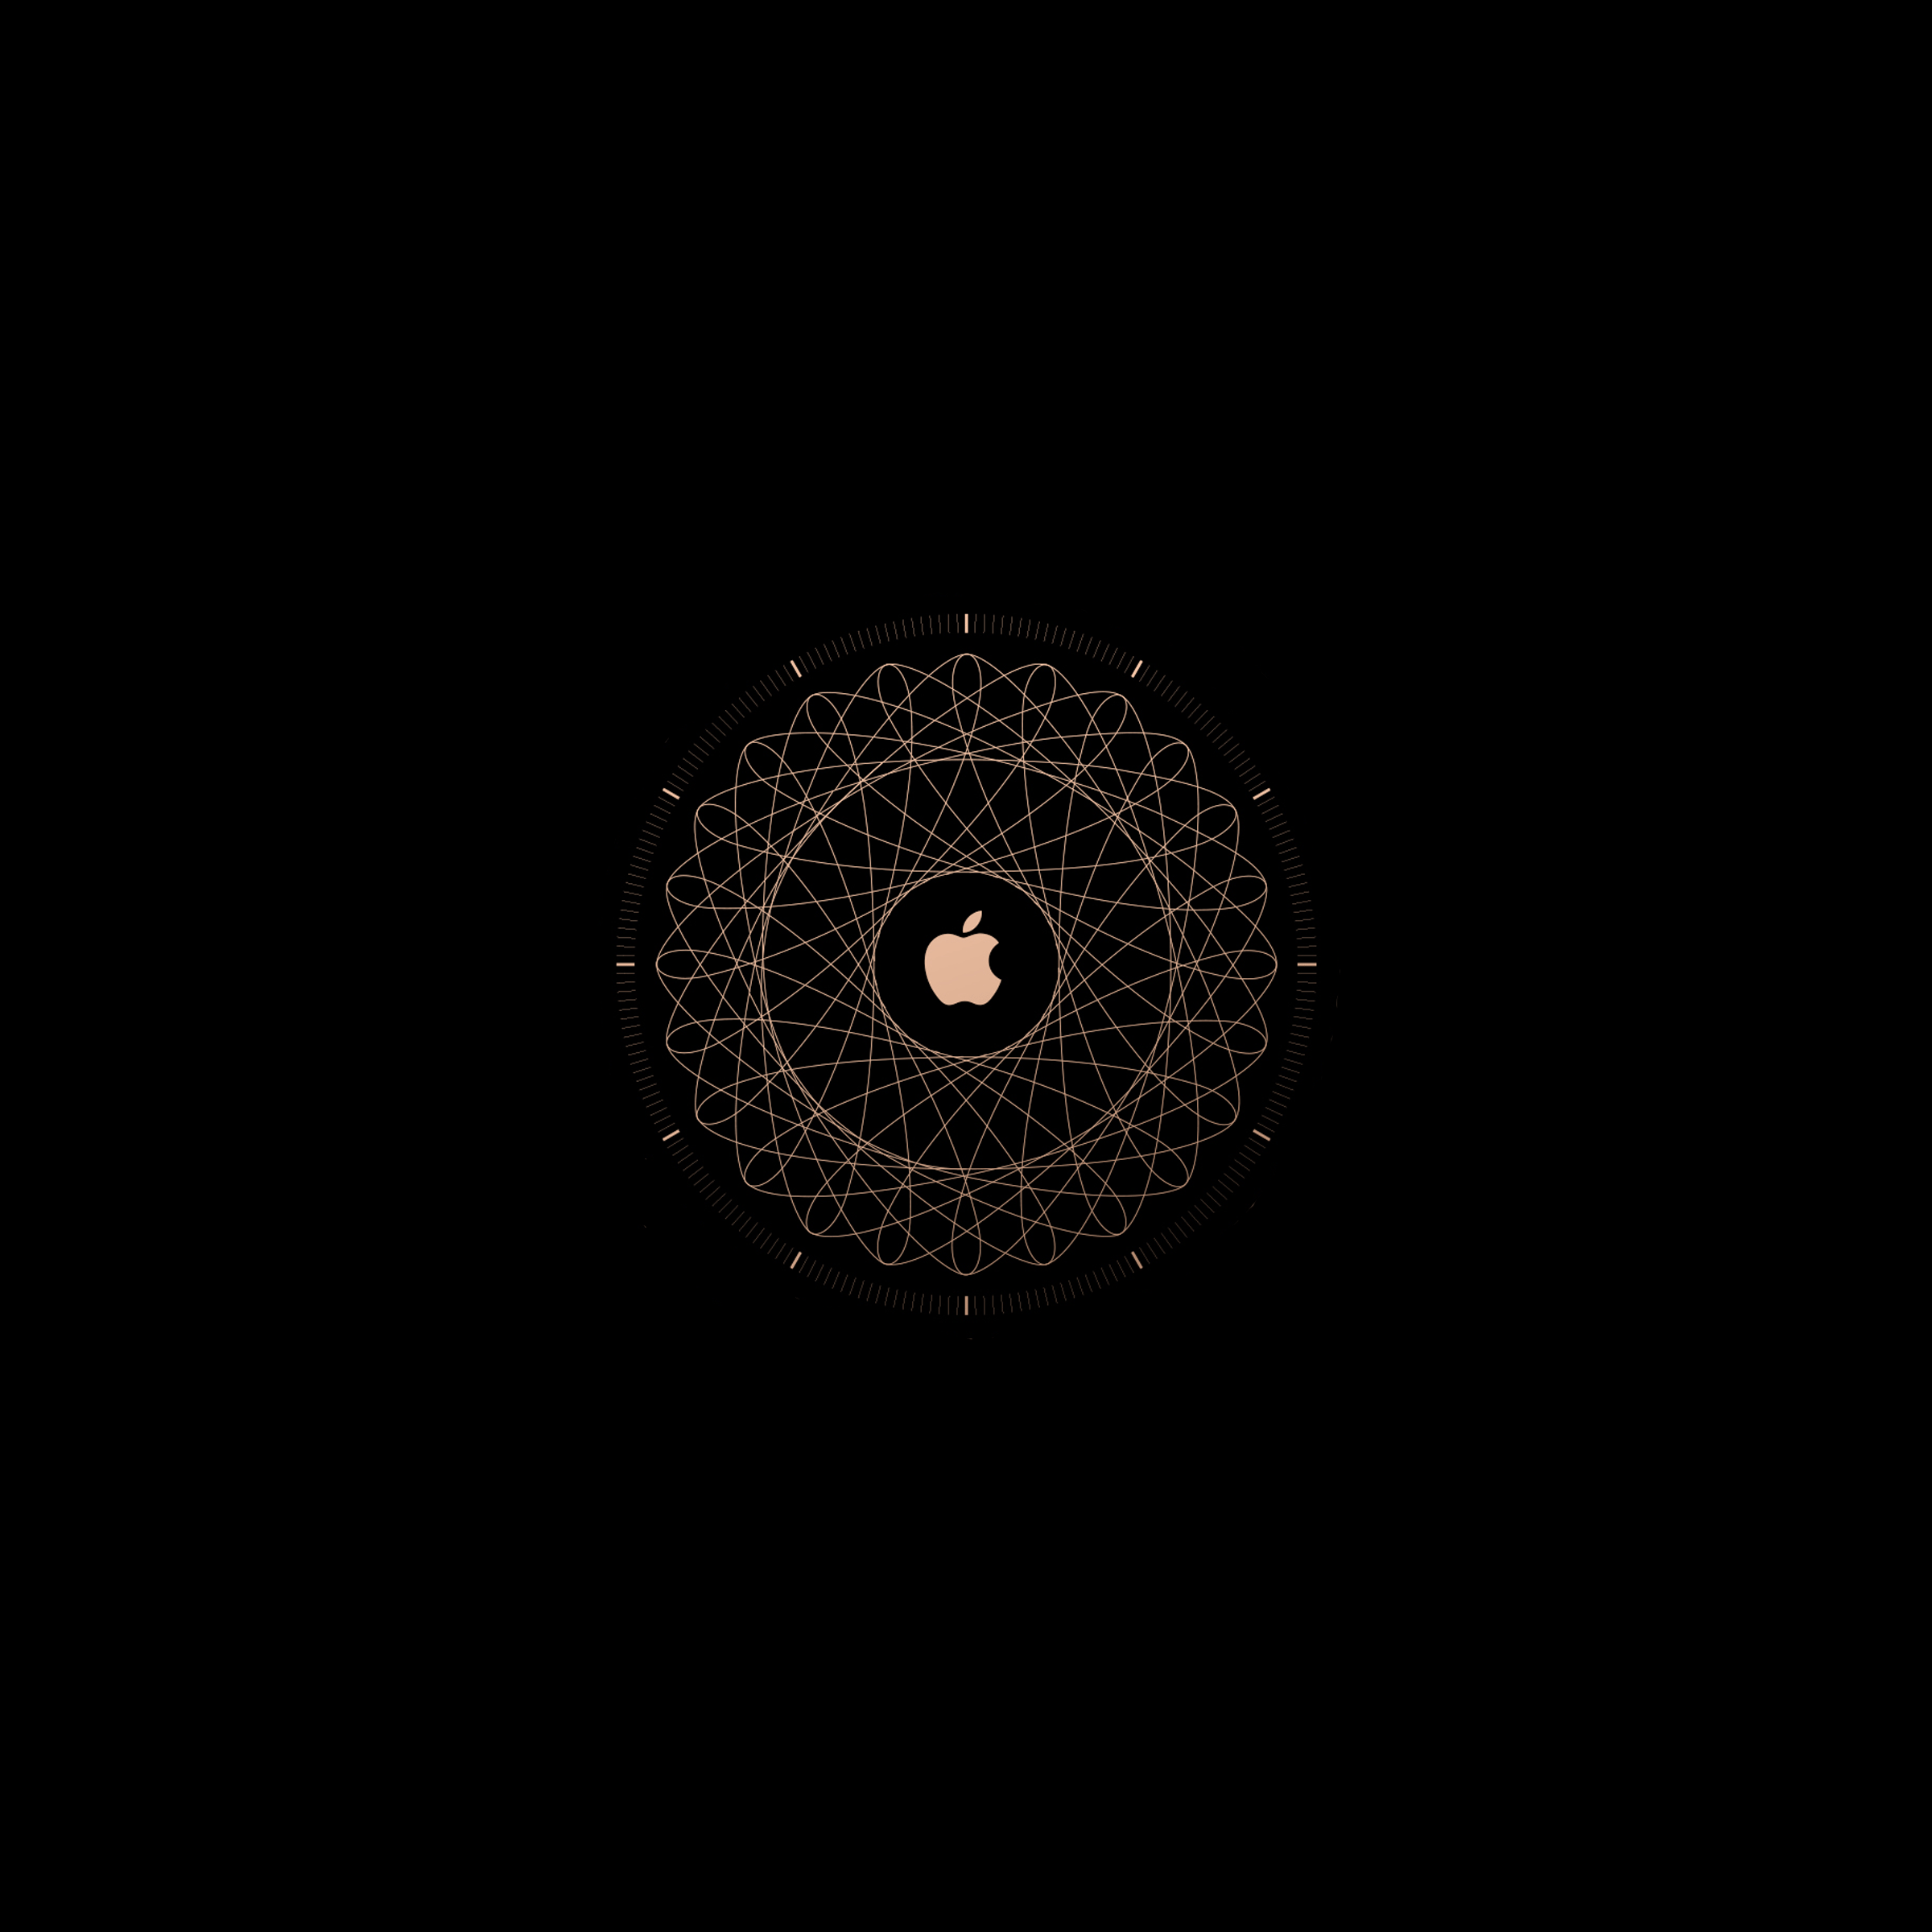 A black wallpaper with a gold apple logo in the middle - Apple Watch